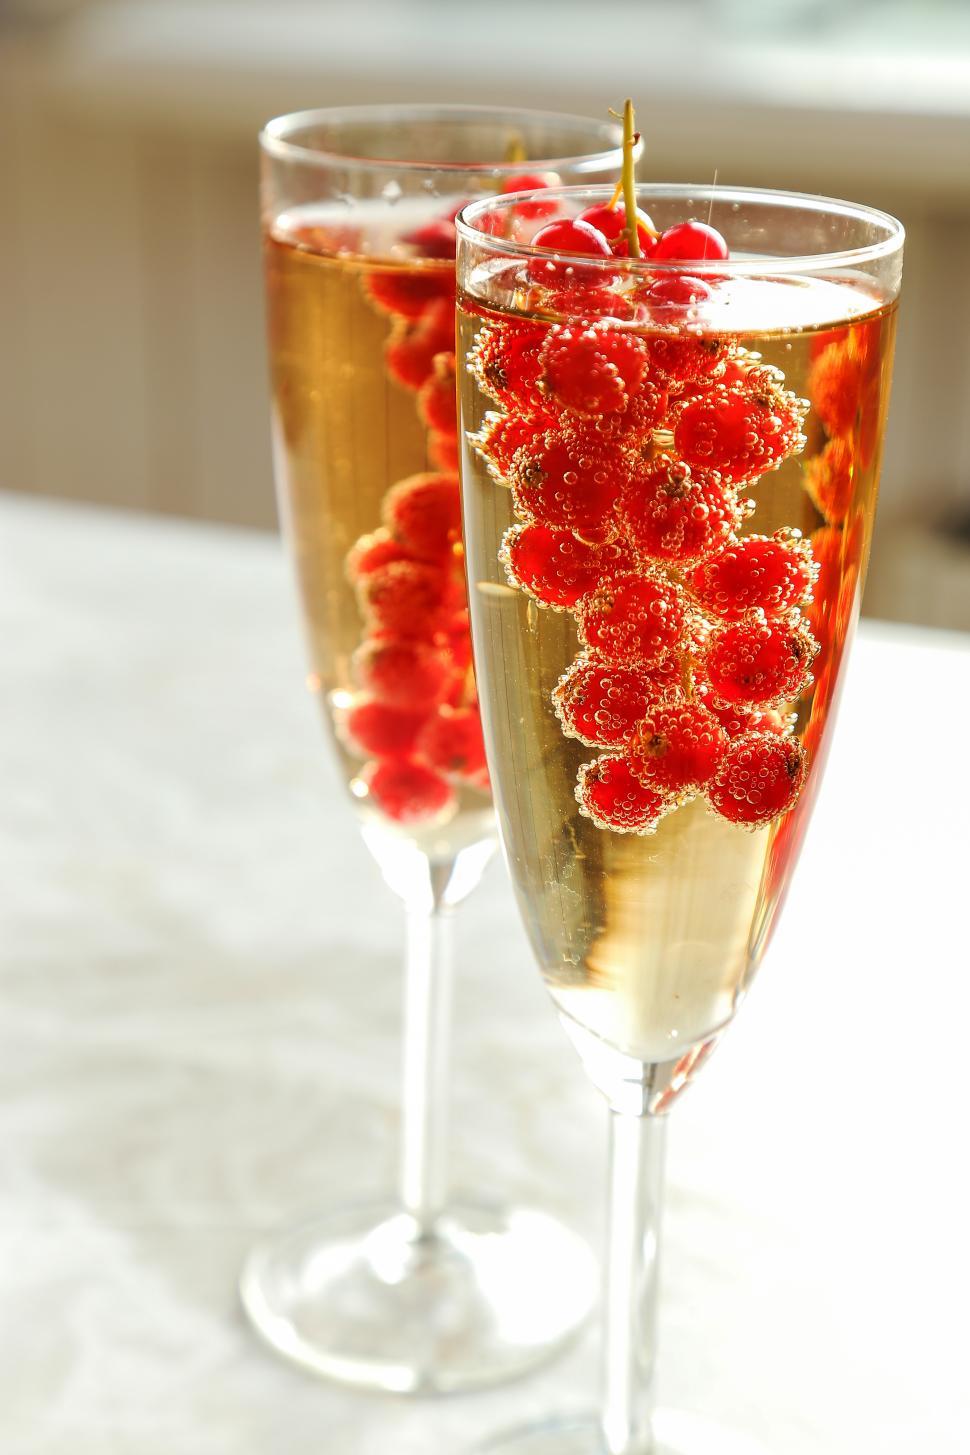 Free Image of Glasses of champagne with berries 